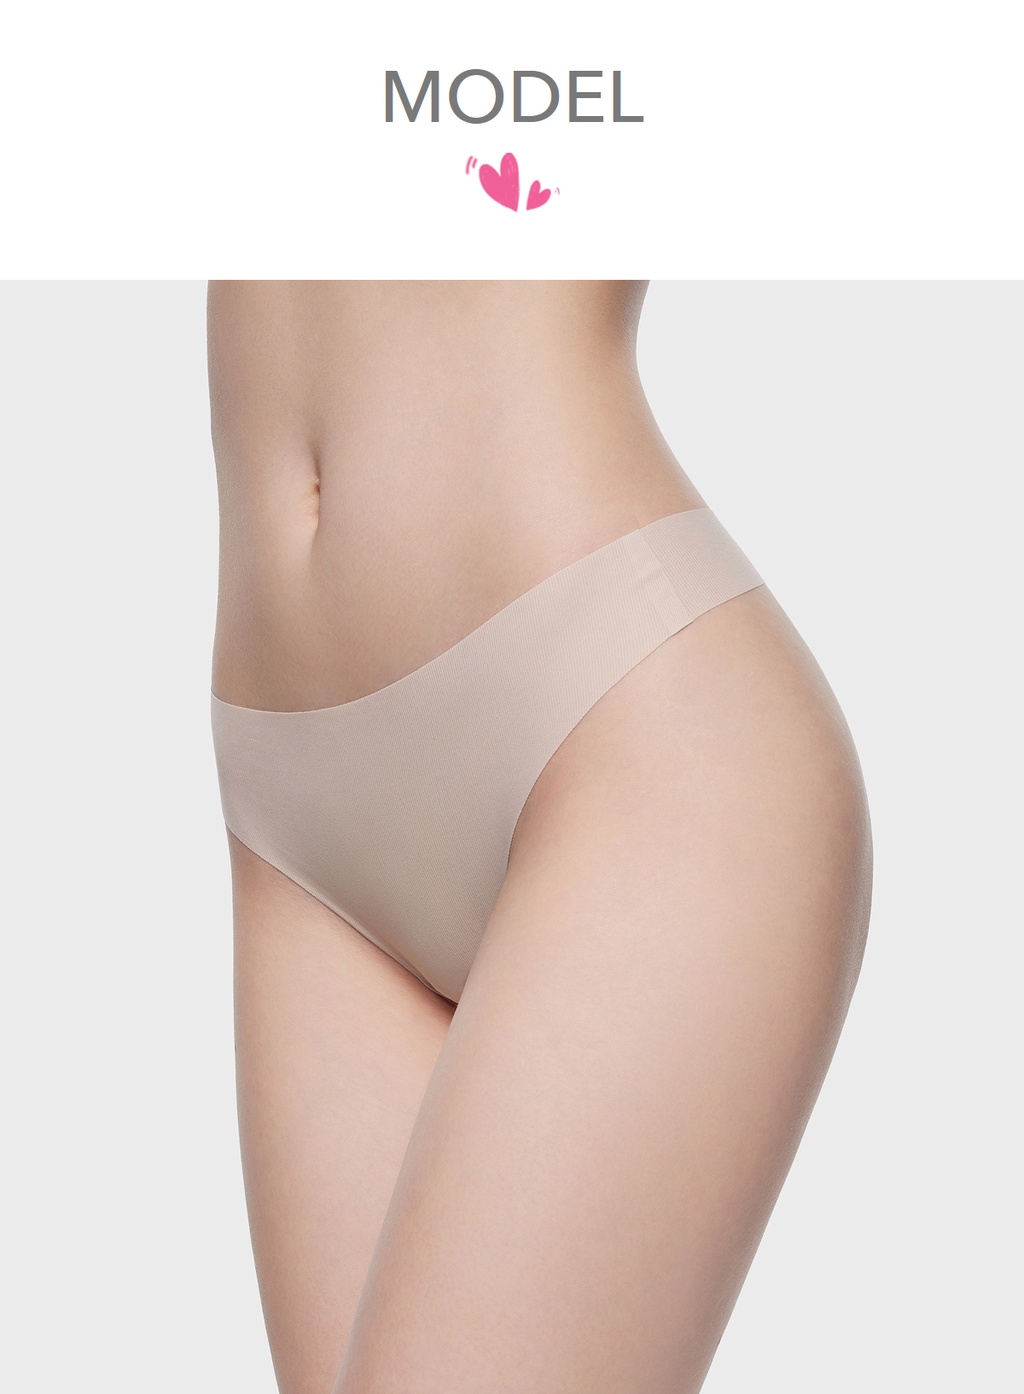 6IXTY8IGHT GINNY SOLID, Seamless Clean-cut Thong Panties Low rise Rib  Fabric for Woman Girl Underwear PT13123